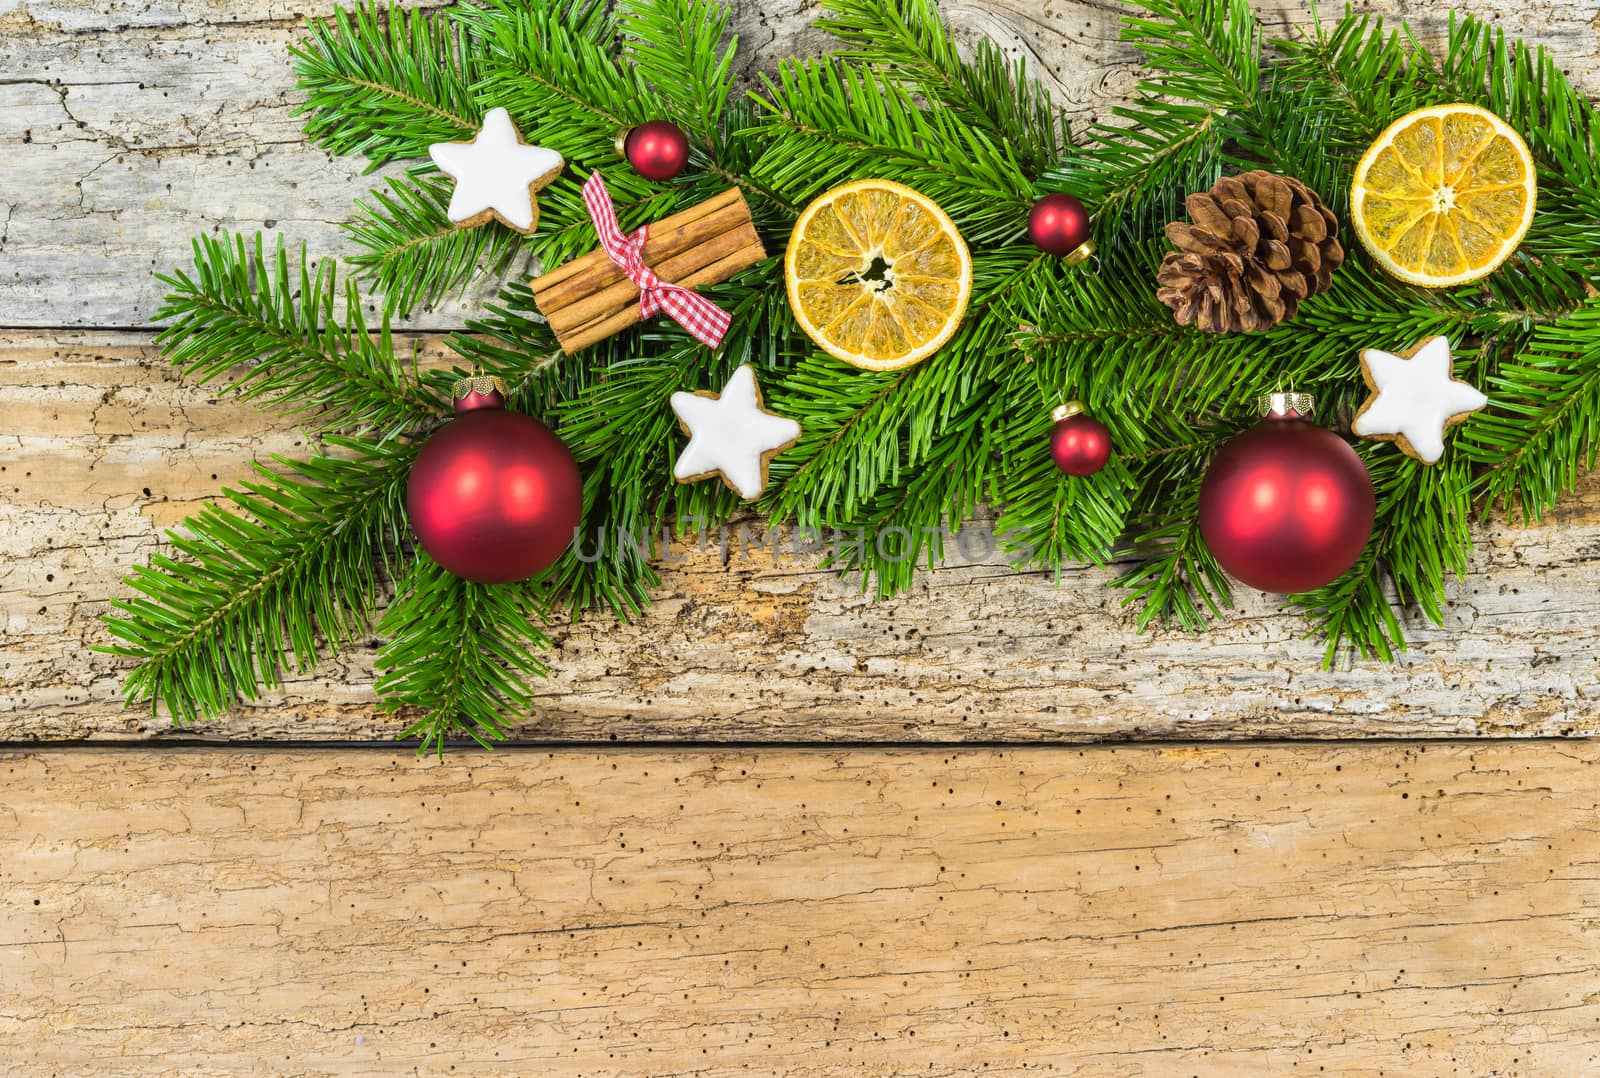 Christmas background with fir tree branch, natural decorations and ornaments on wood with copy space